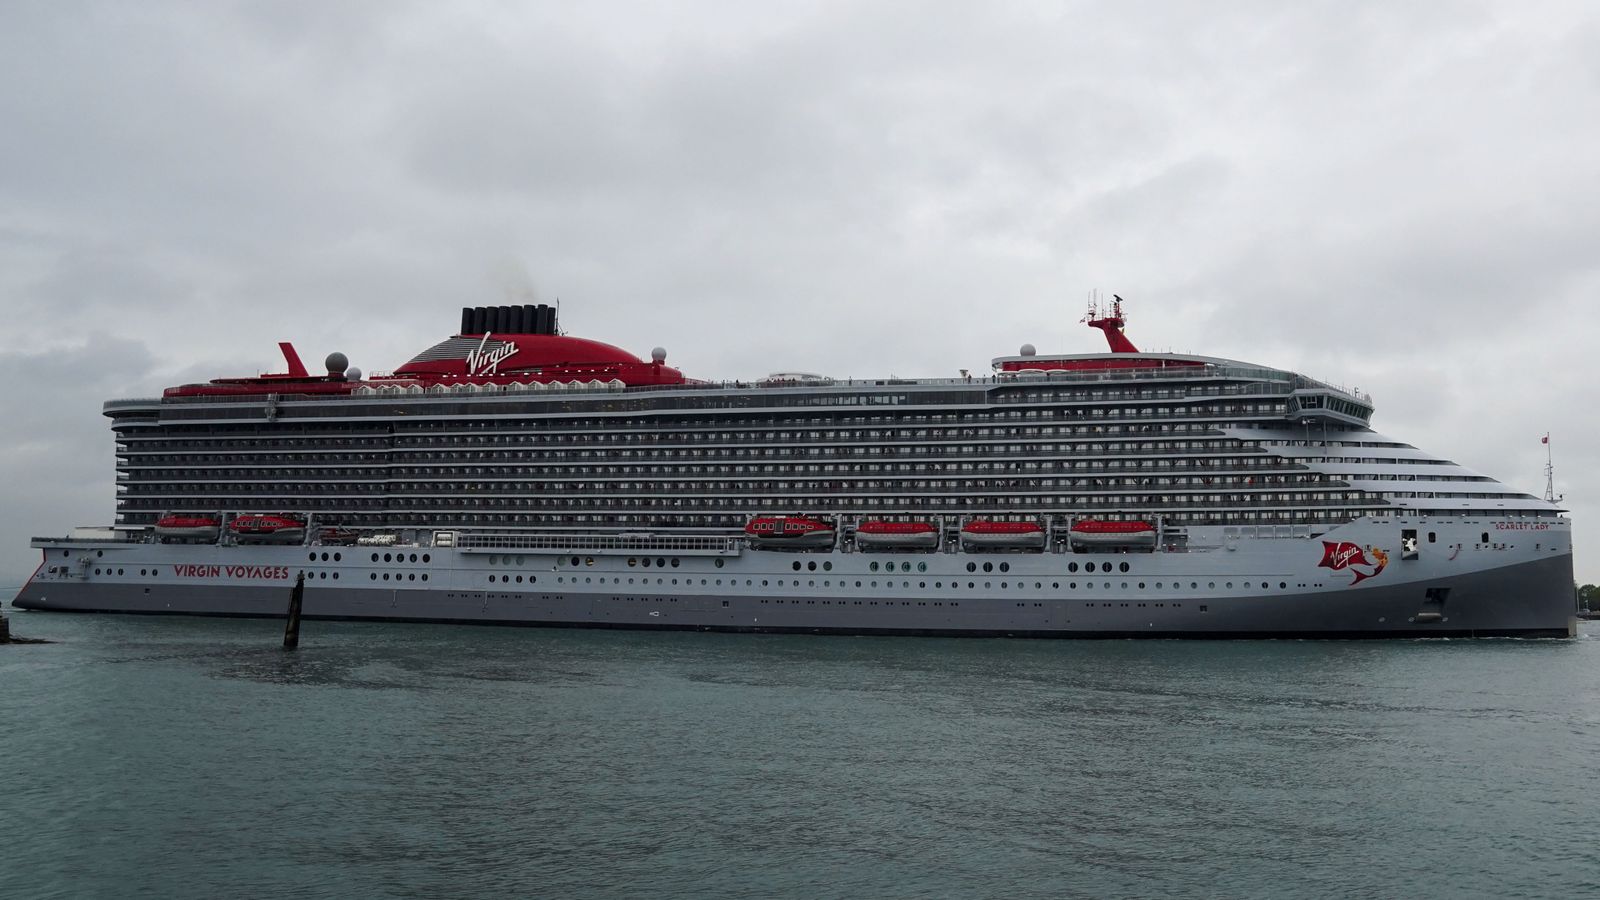 A Virgin Voyages cruise passenger has died after falling from the ship